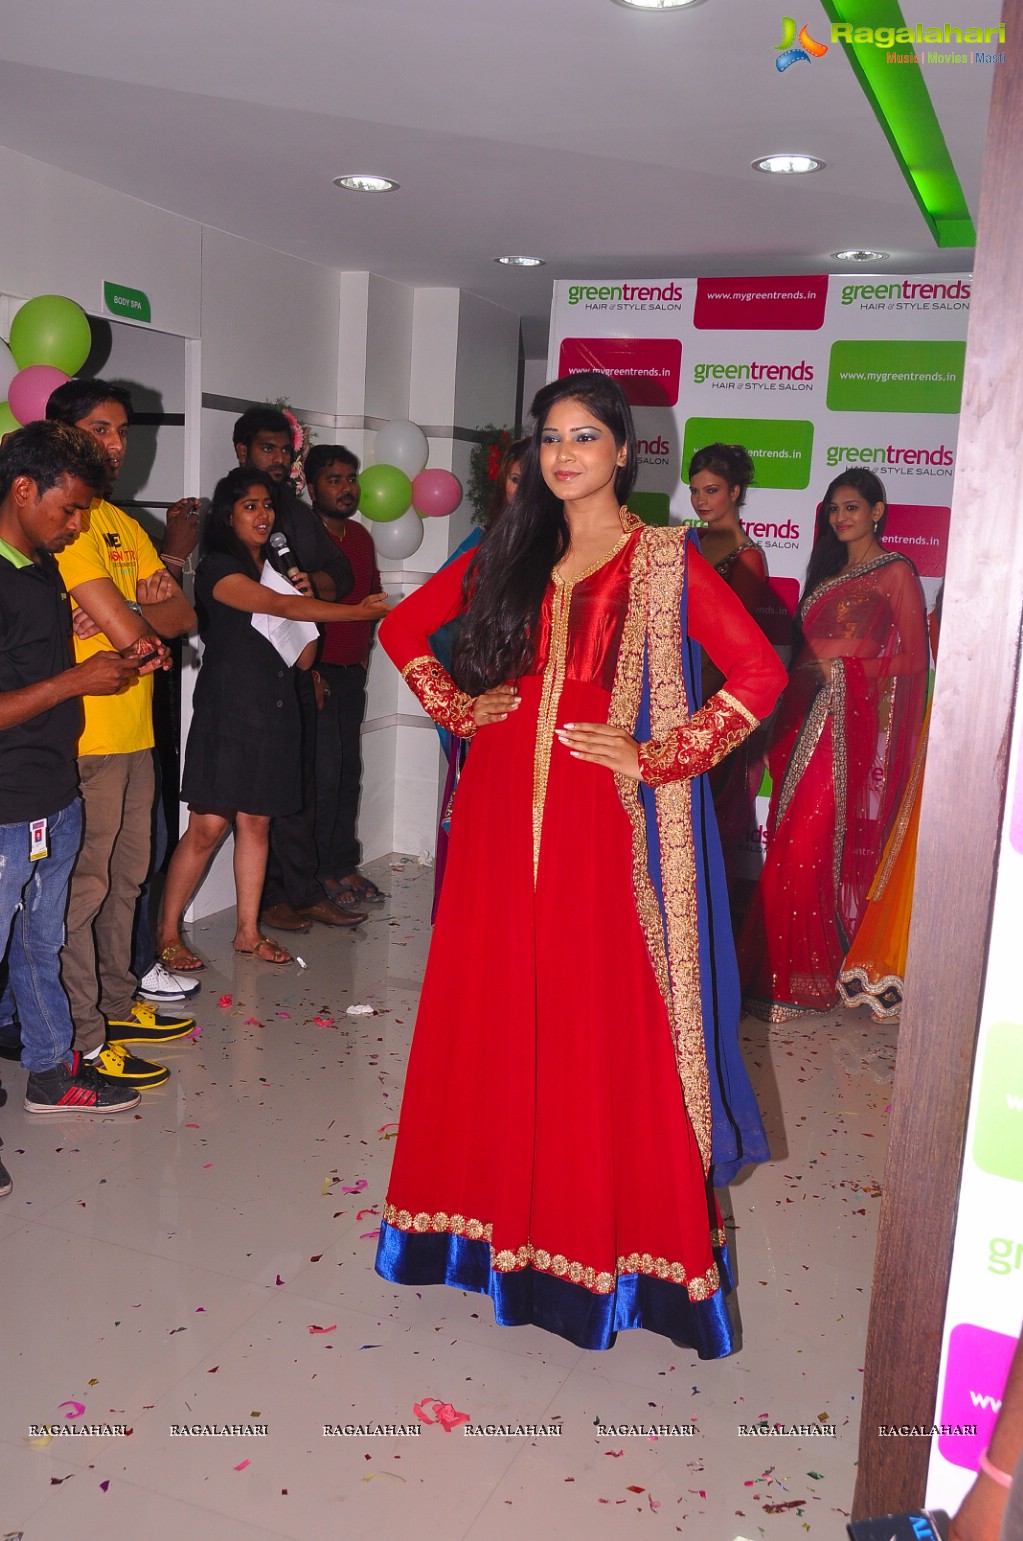 Madhu Shalini launches Green Trends Hair and Style Salon, Hyderabad